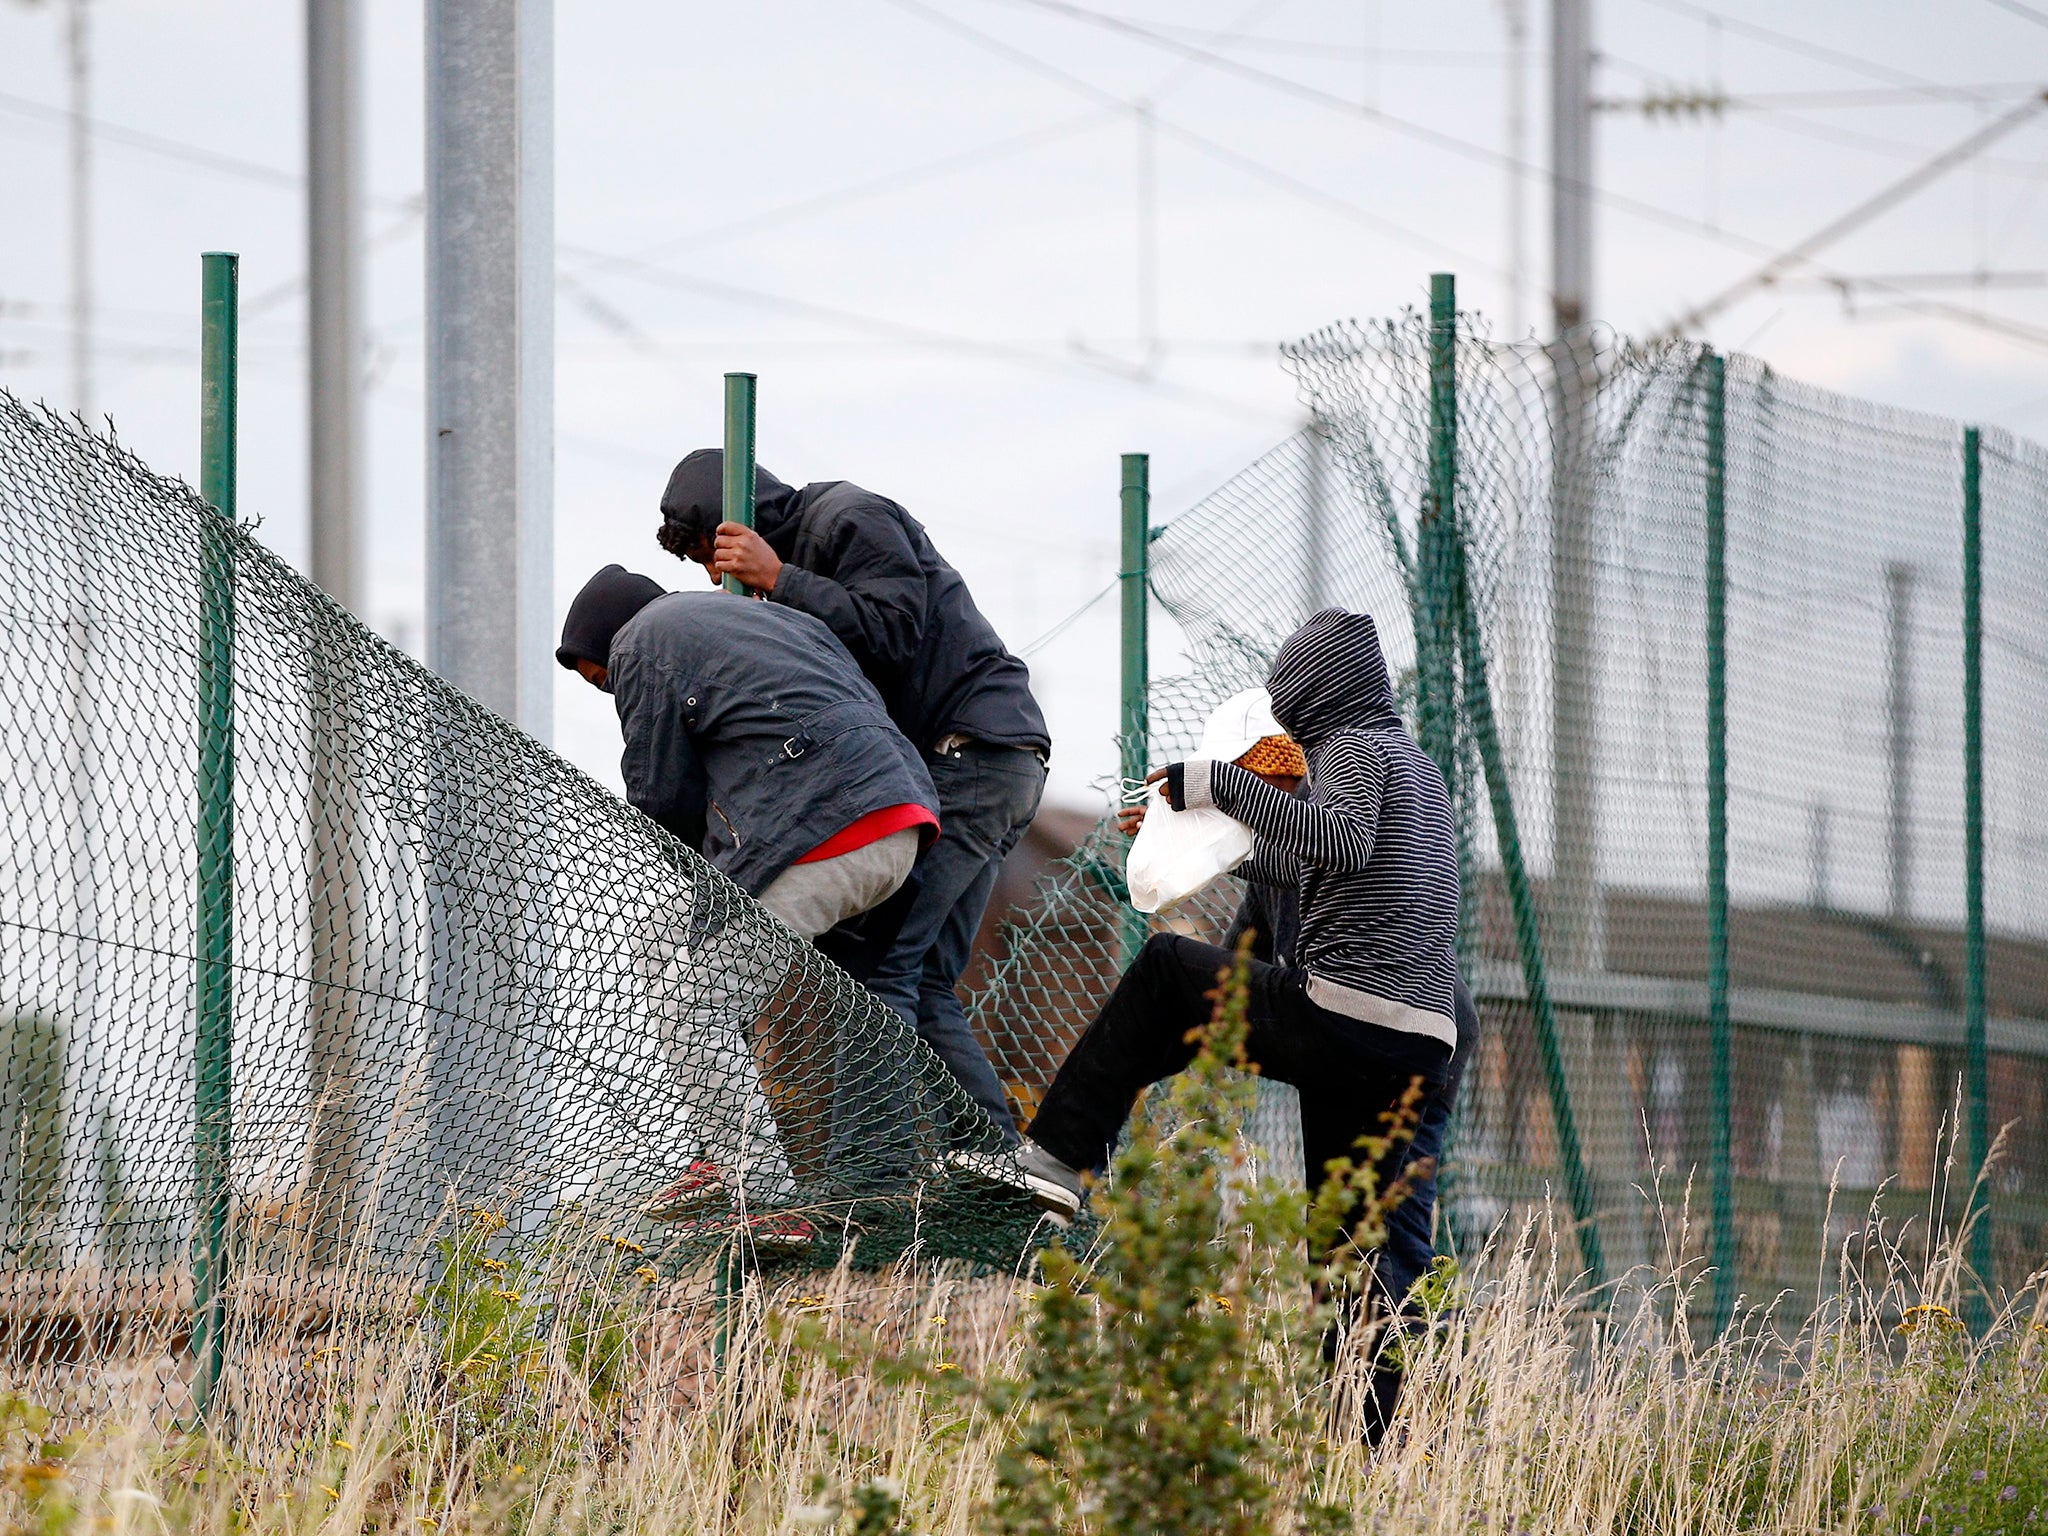 Migrants step over the fence as they try to catch a train to reach England, in Calais